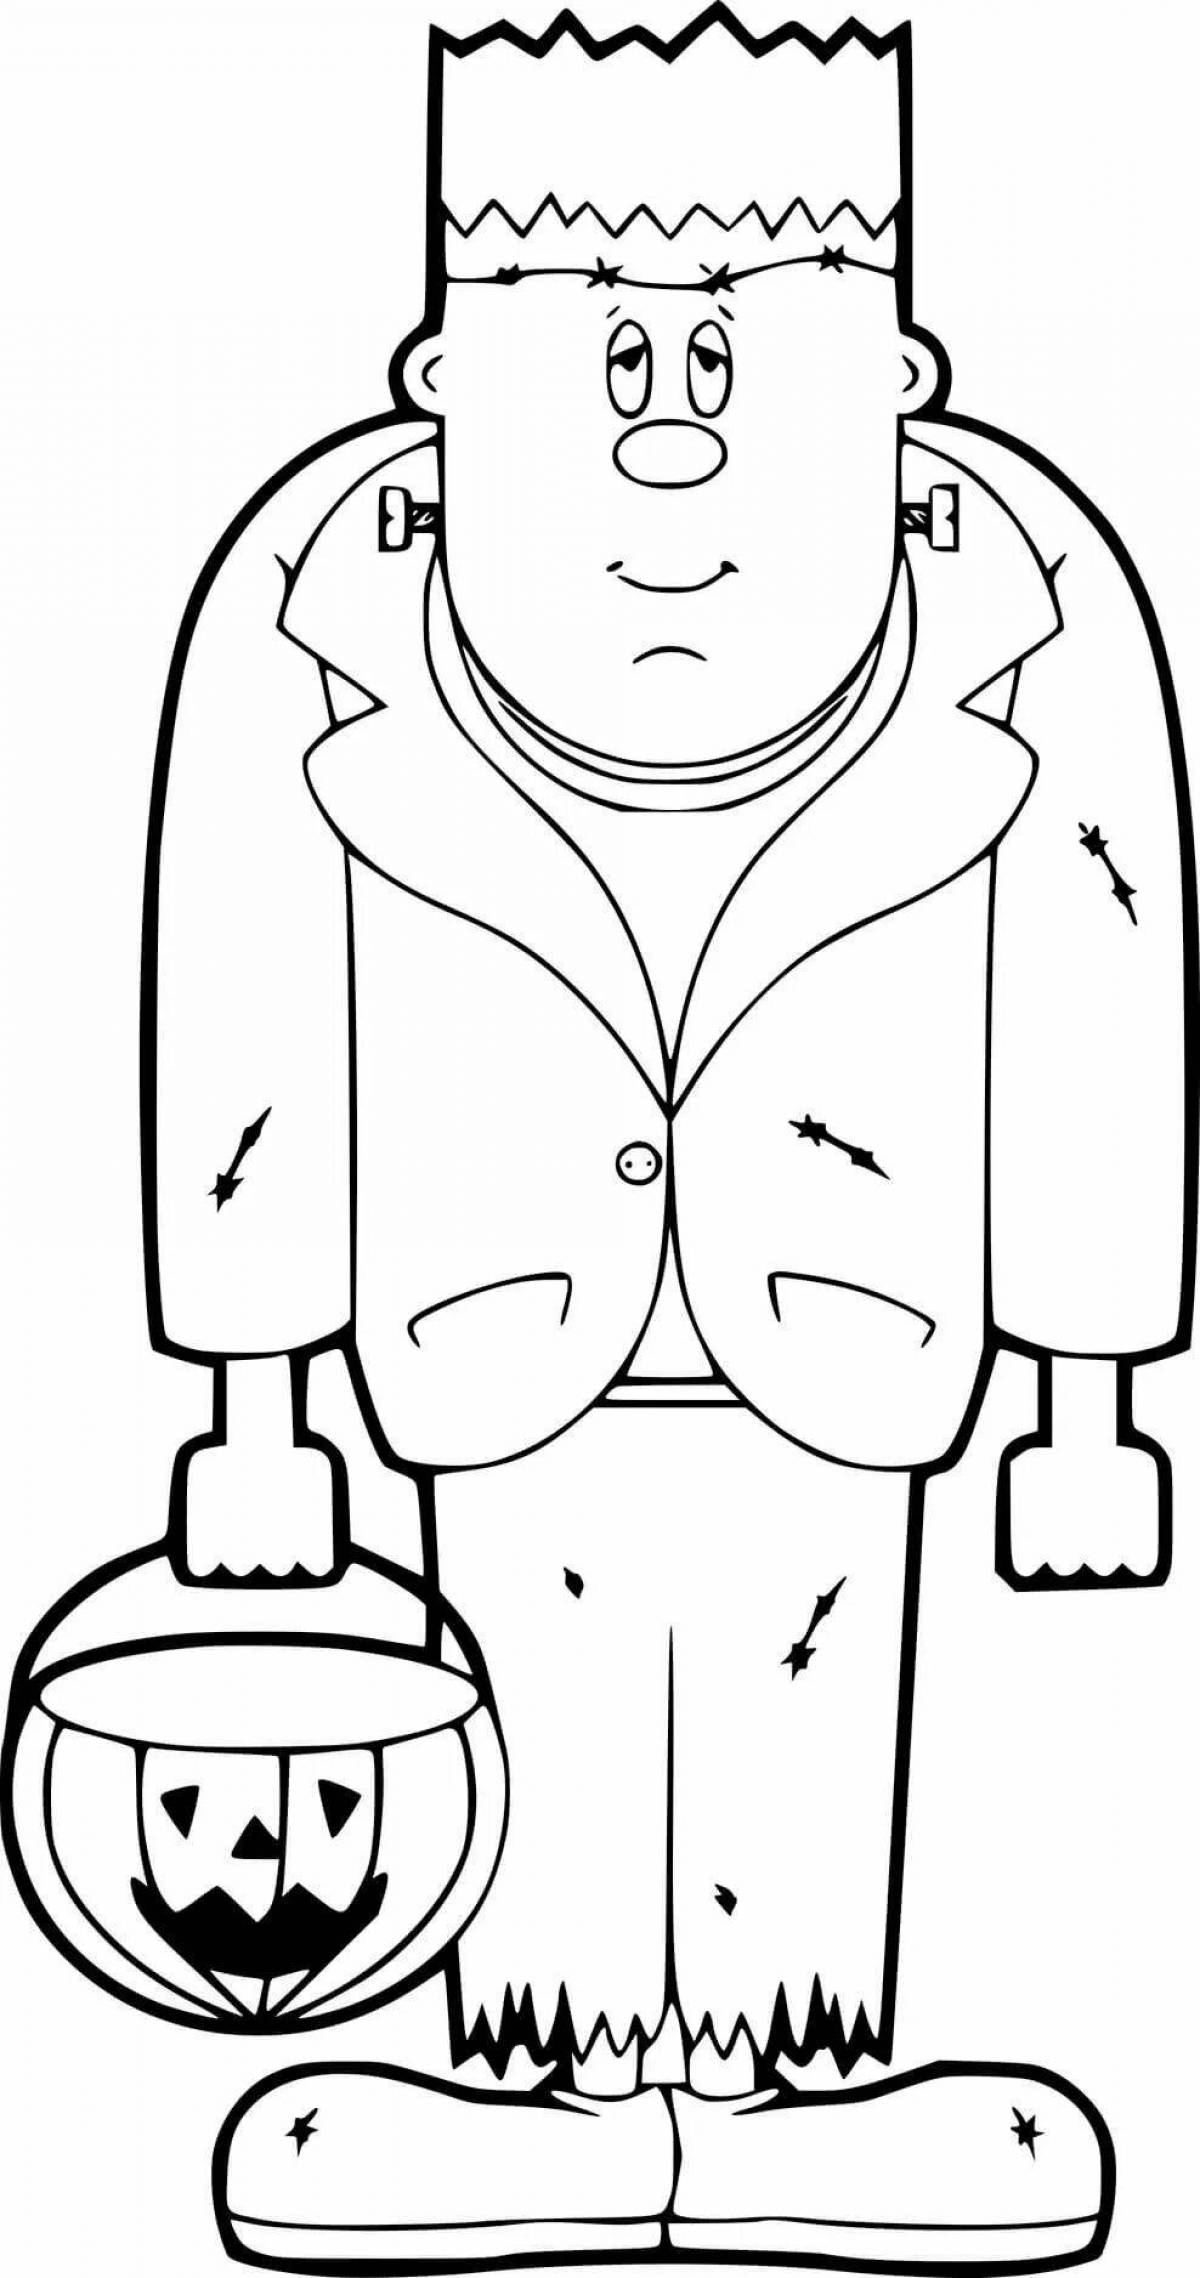 Exciting bum coloring page